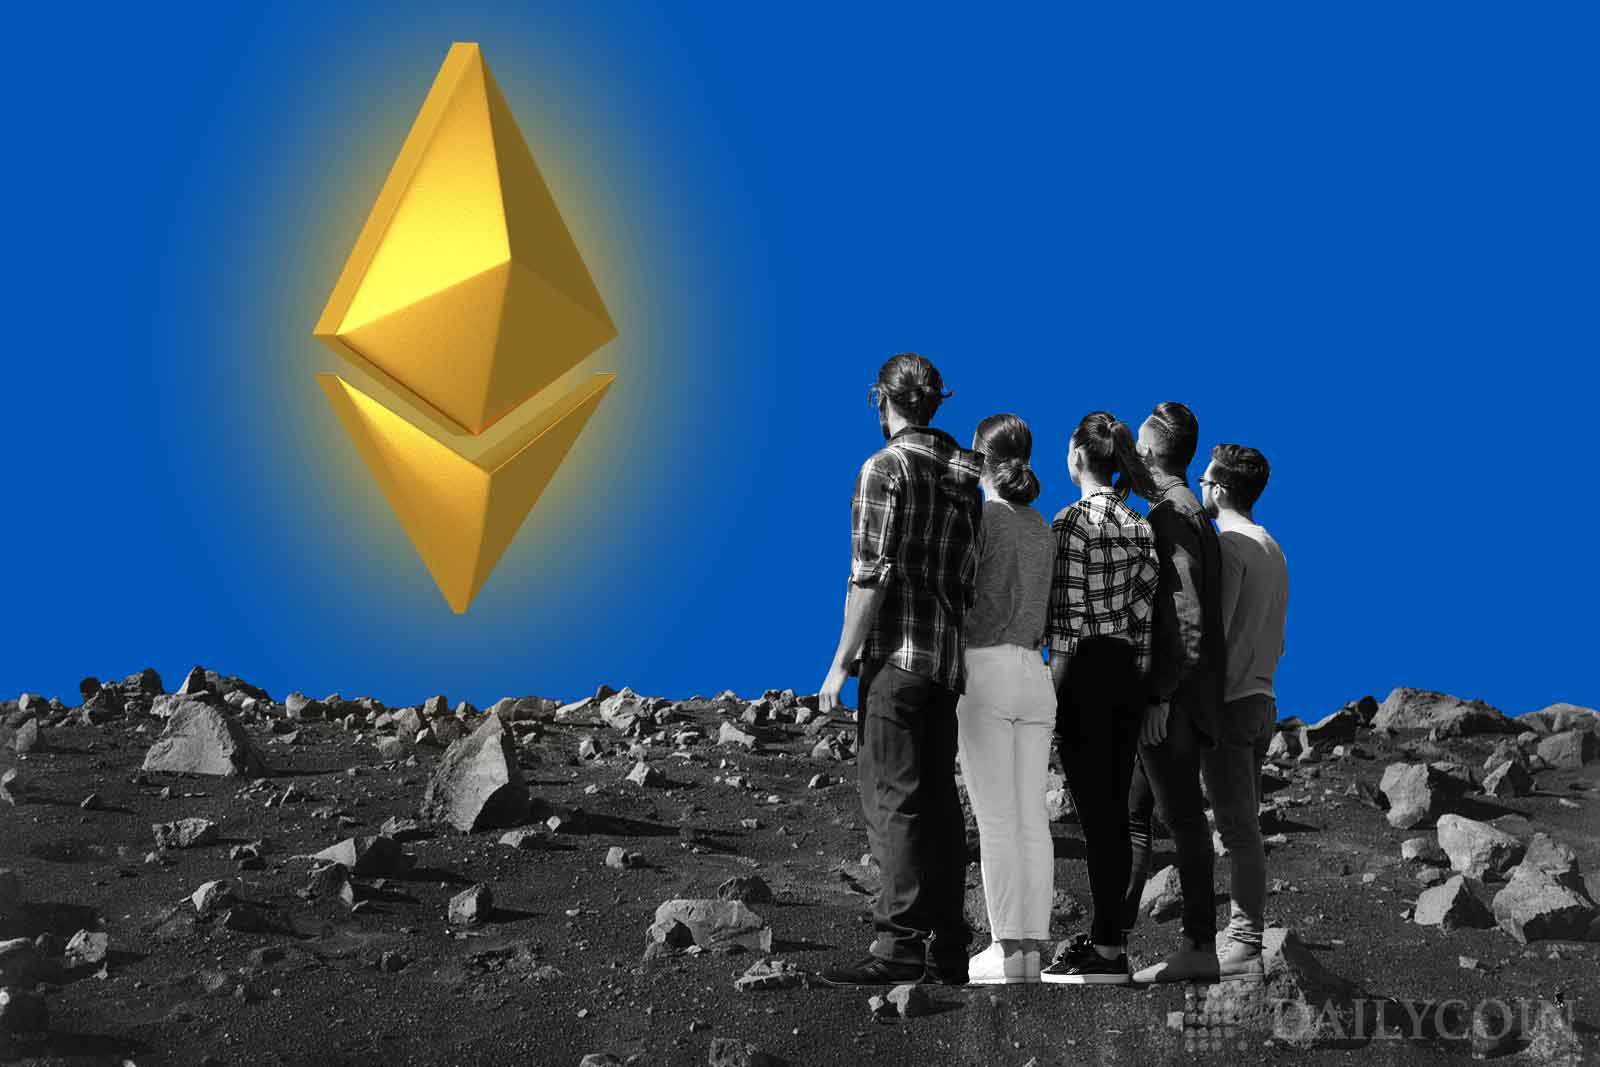 What will happen on the day of the Ethereum network update